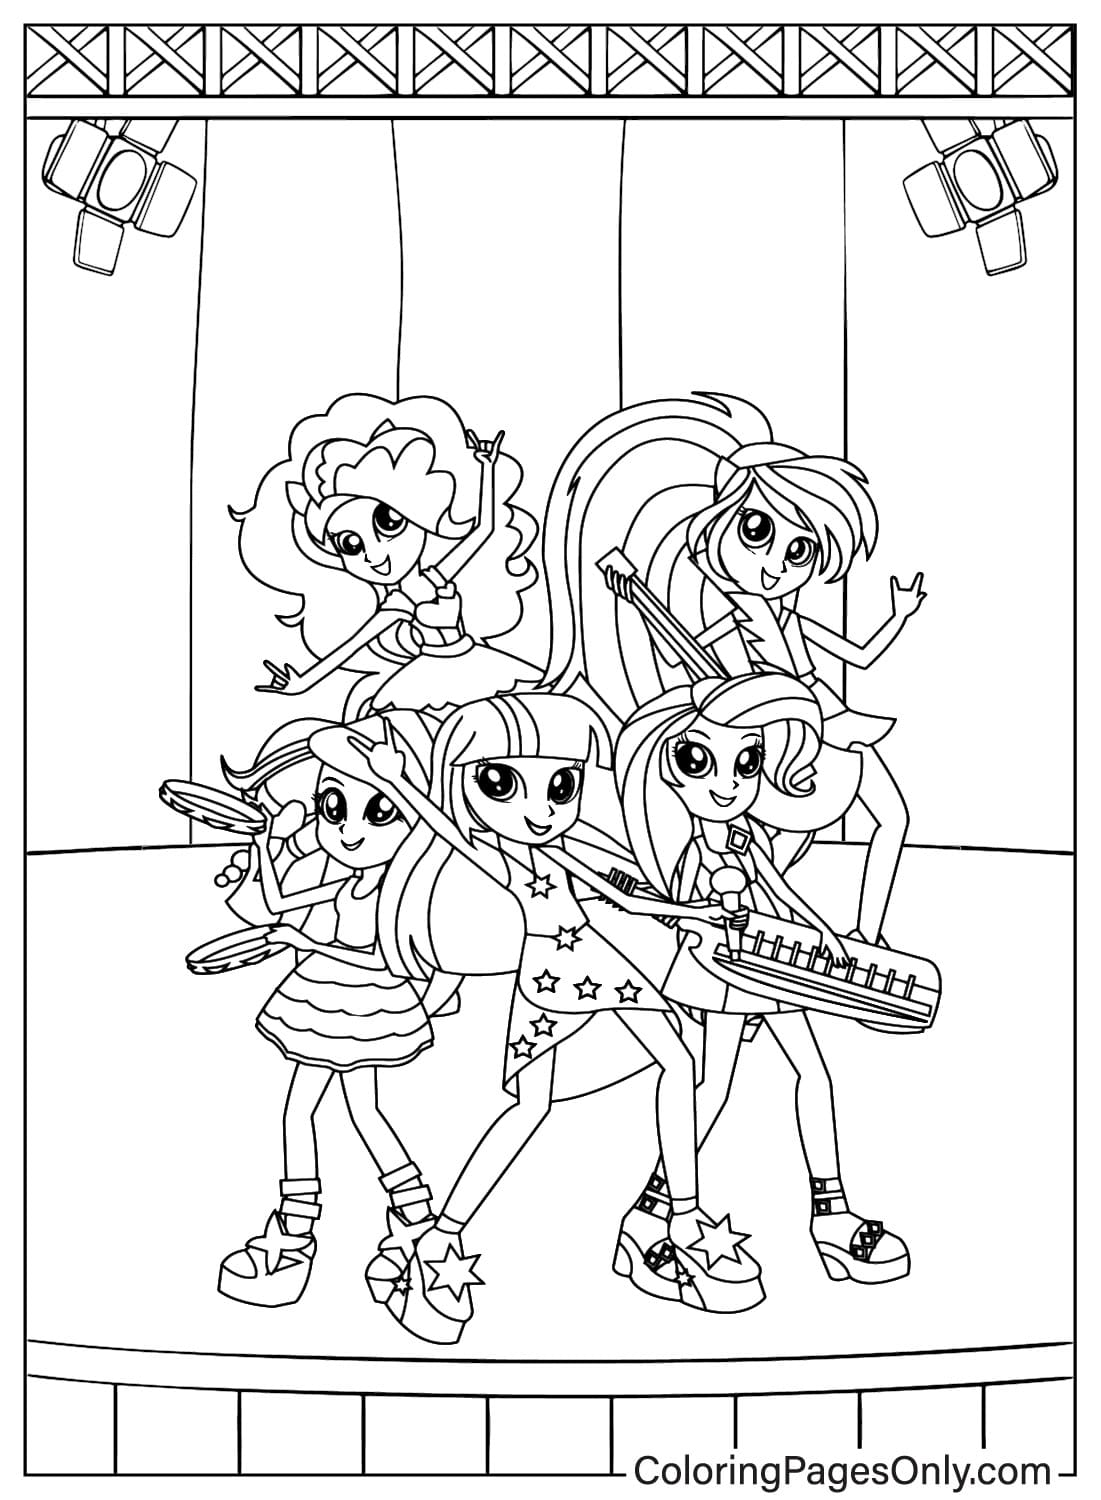 Equestria Girls Free Coloring Page